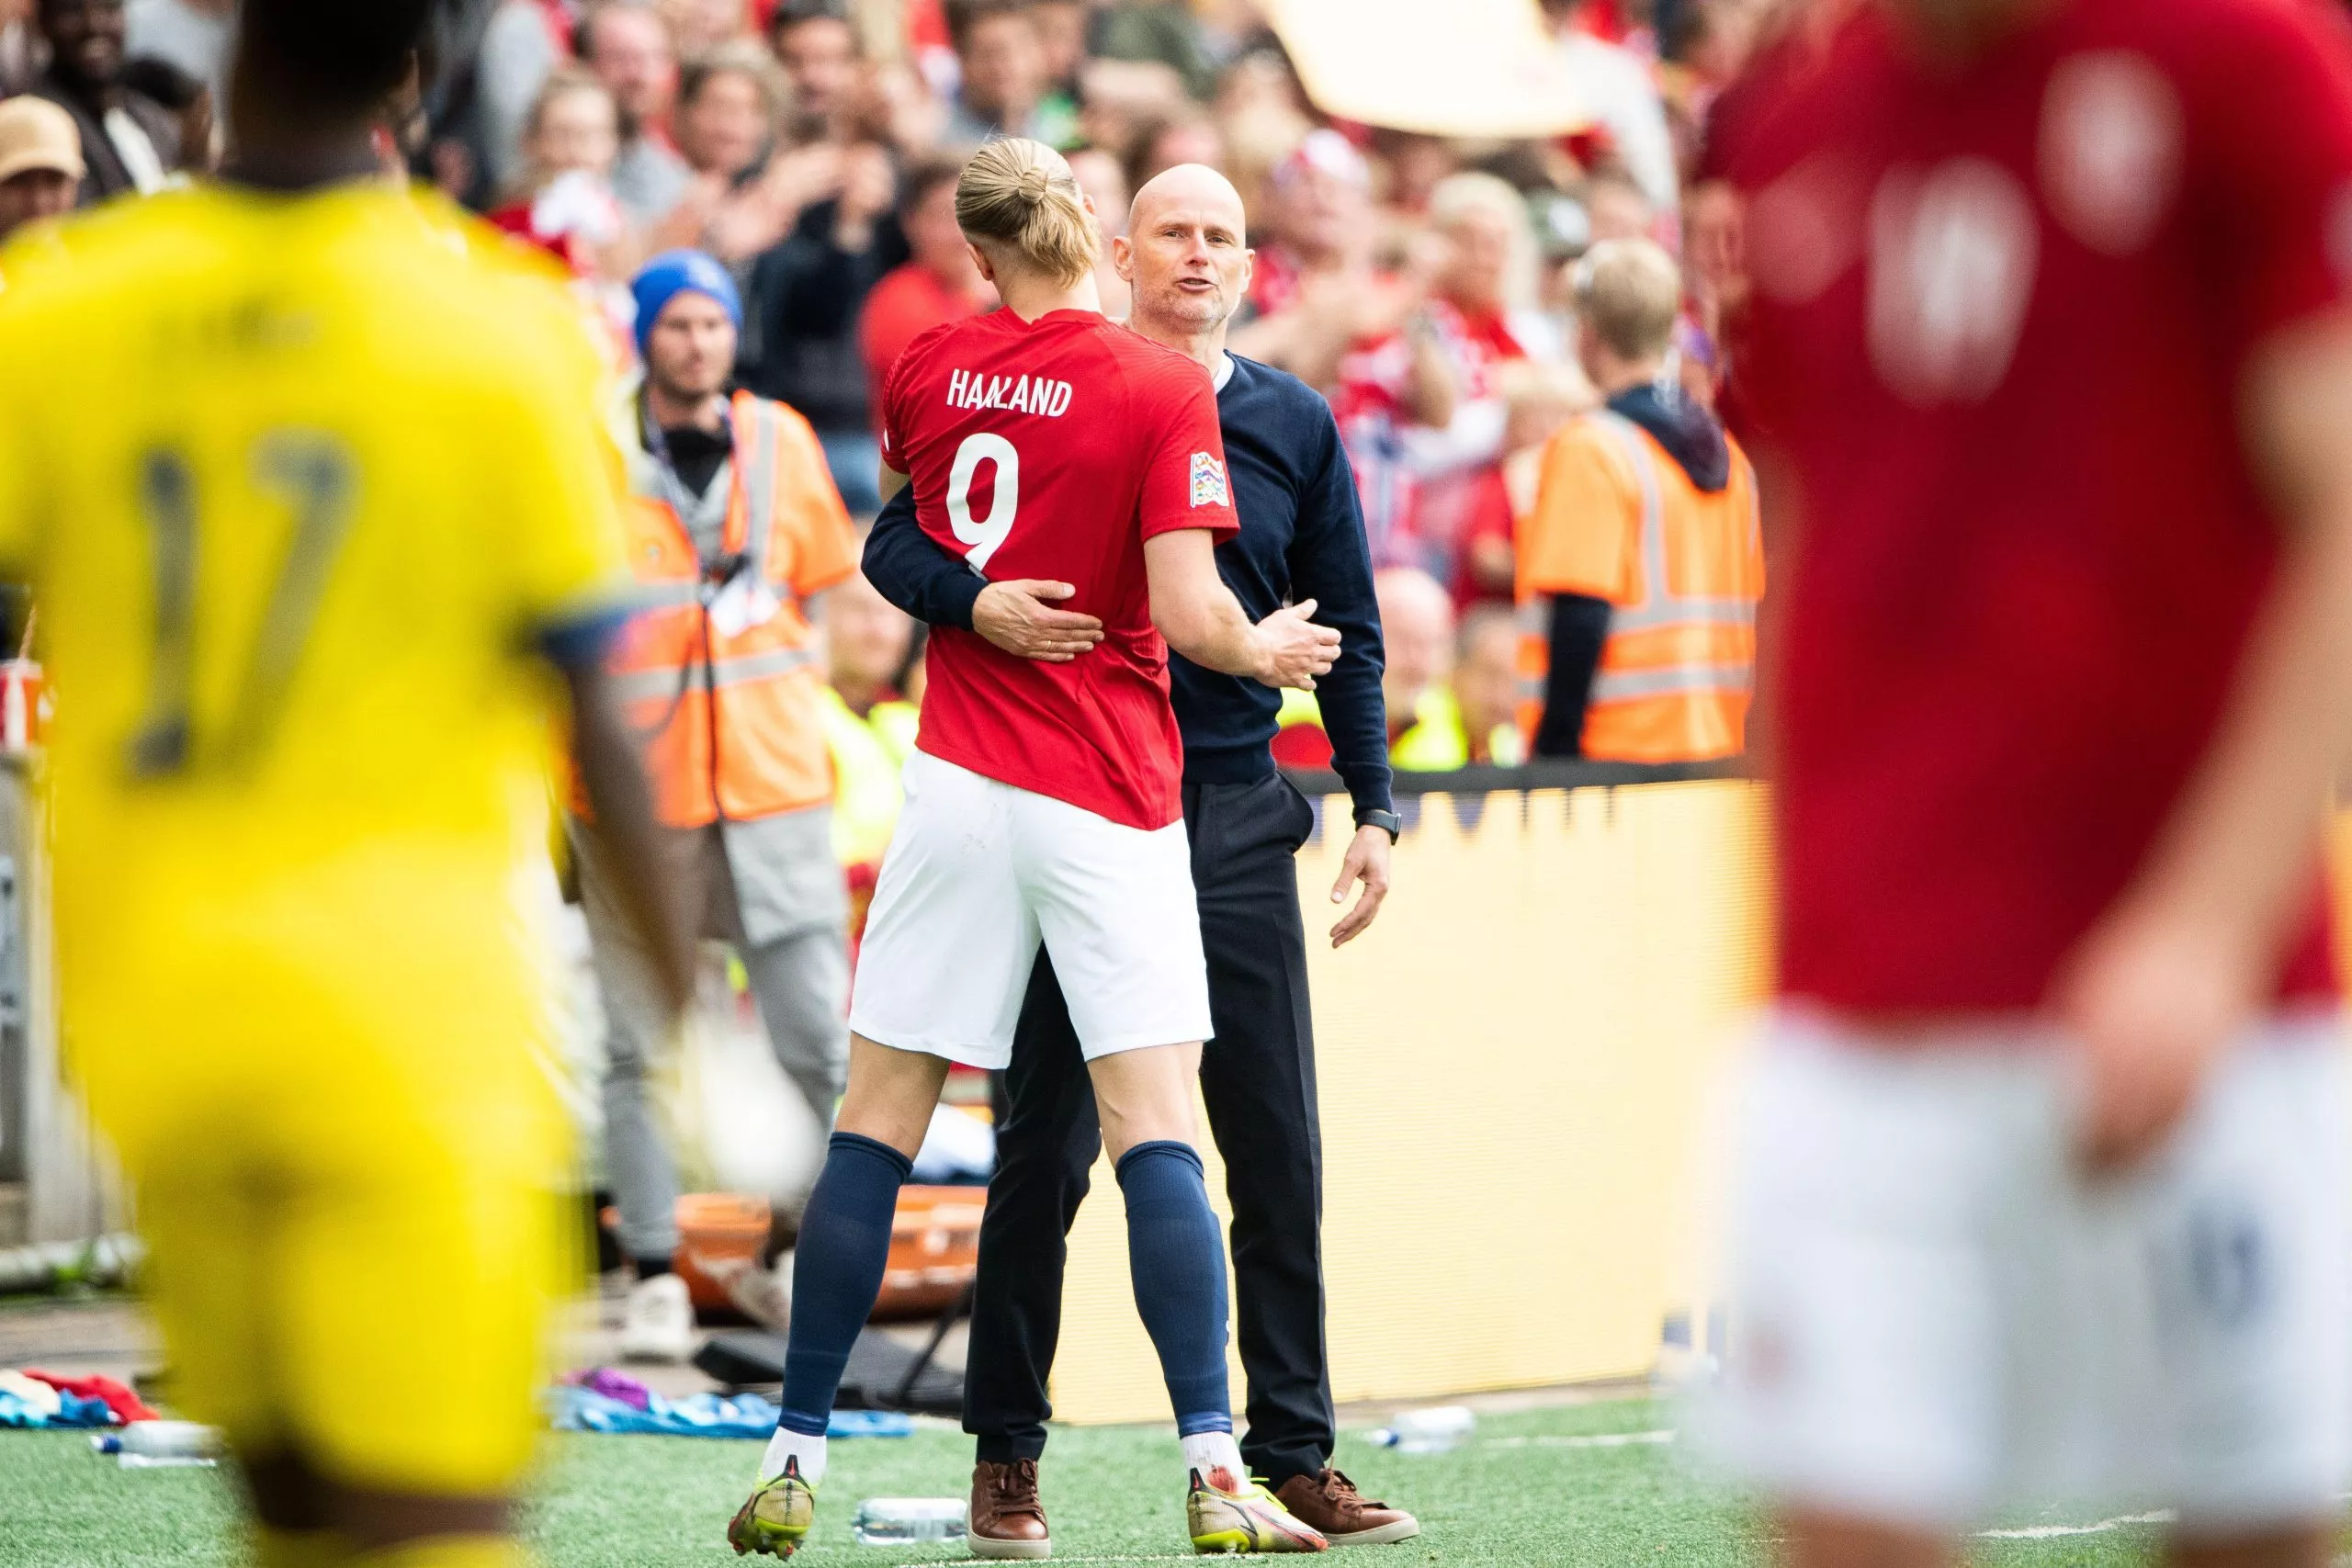 Oslo, Norway. 12th June, 2022. Head coach Staale Solbakken of Norway hugs Erling Haaland after he has been substitured during the UEFA Nations League match between Norway and Sweden at Ullevaal Stadion in Oslo. (Photo Credit: Gonzales Photo/Alamy Live News